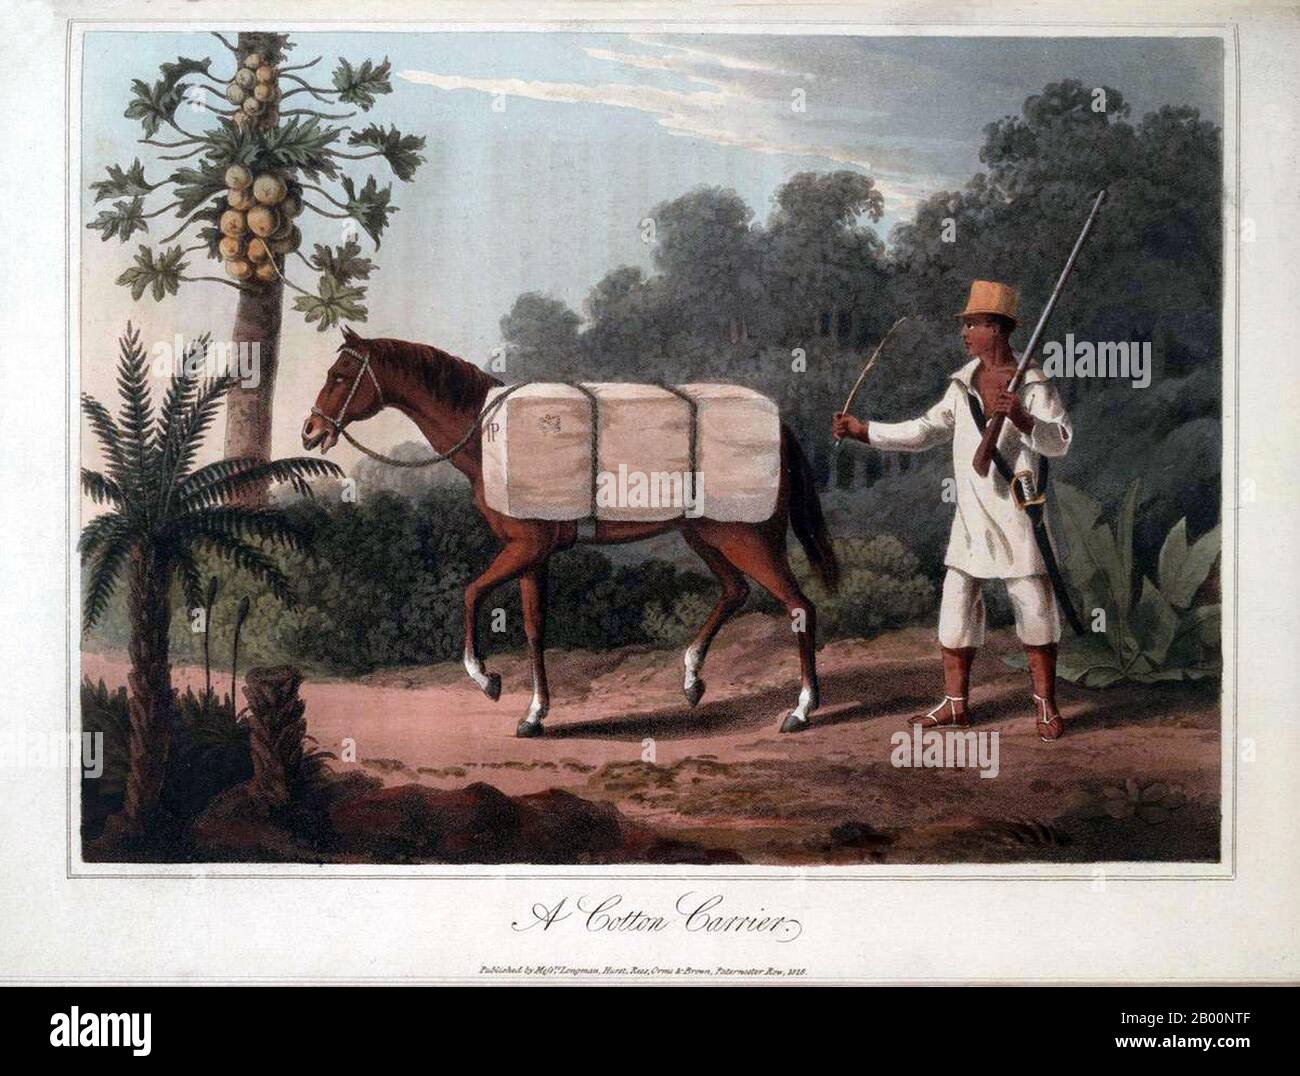 Brazil: 'A Cotton Carrier'. From Henry Koster's 1816 volume, 'Travels in Brazil'.  Brazil was a colony of Portugal from the landing of Pedro Álvares Cabral in 1500 until 1815, when it was elevated to the status of United Kingdom with Portugal and the Algarve. The colonial bond was in fact broken in 1808, when the capital of the Portuguese Kingdom was transferred from Lisbon to Rio de Janeiro, after Napoleon invaded Portugal. Independence from Portugal was achieved in 1822. Initially independent as the Empire of Brazil, the country has been a republic since 1889. Stock Photo